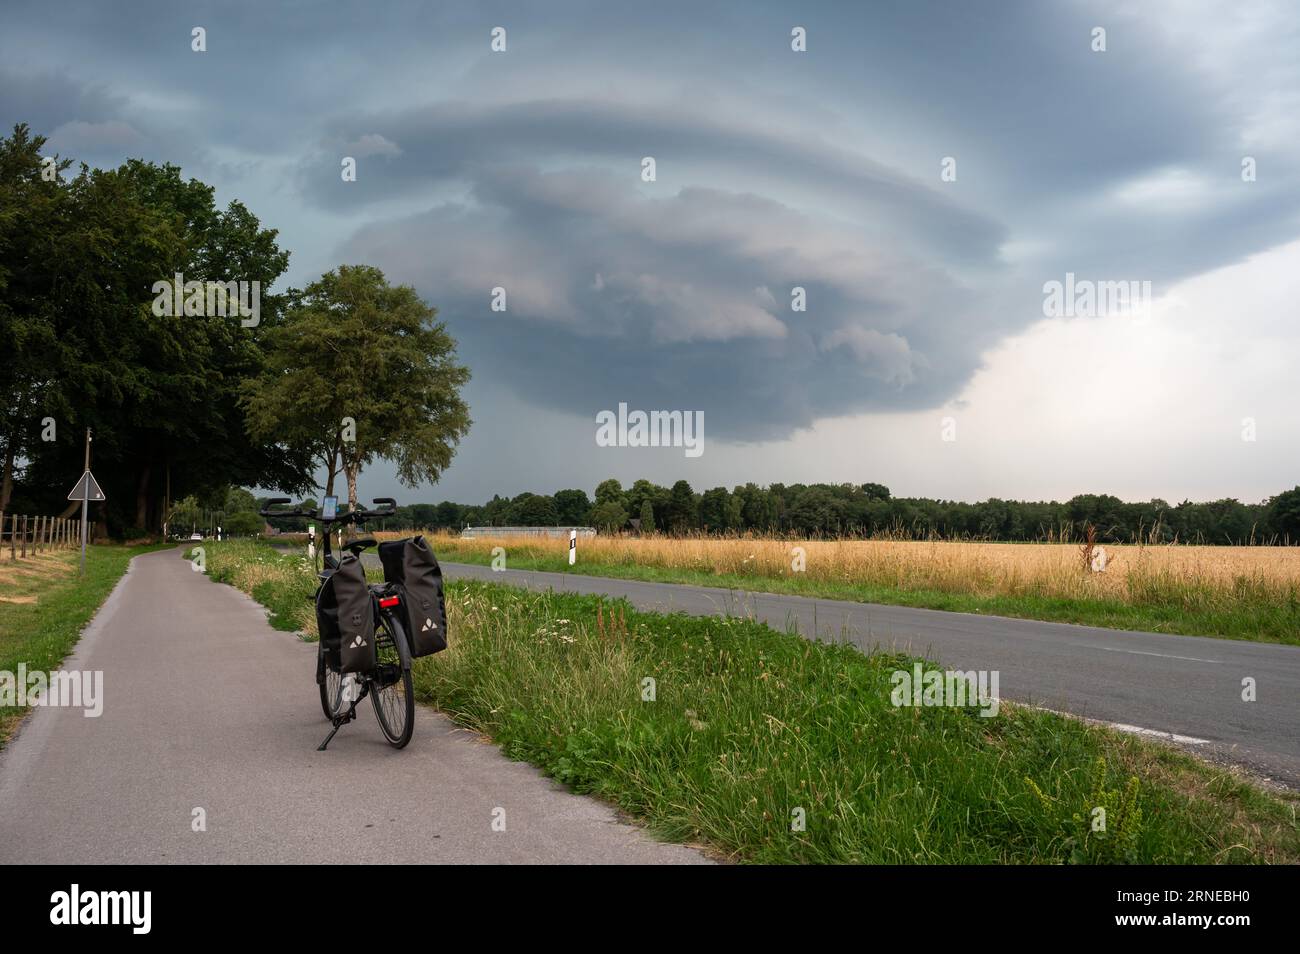 Walbeck, North Rine-Westphalia, Germany, July 14, 2023 - Trekking bike at a country road with a hugh cumulus rain cloud in the background Stock Photo